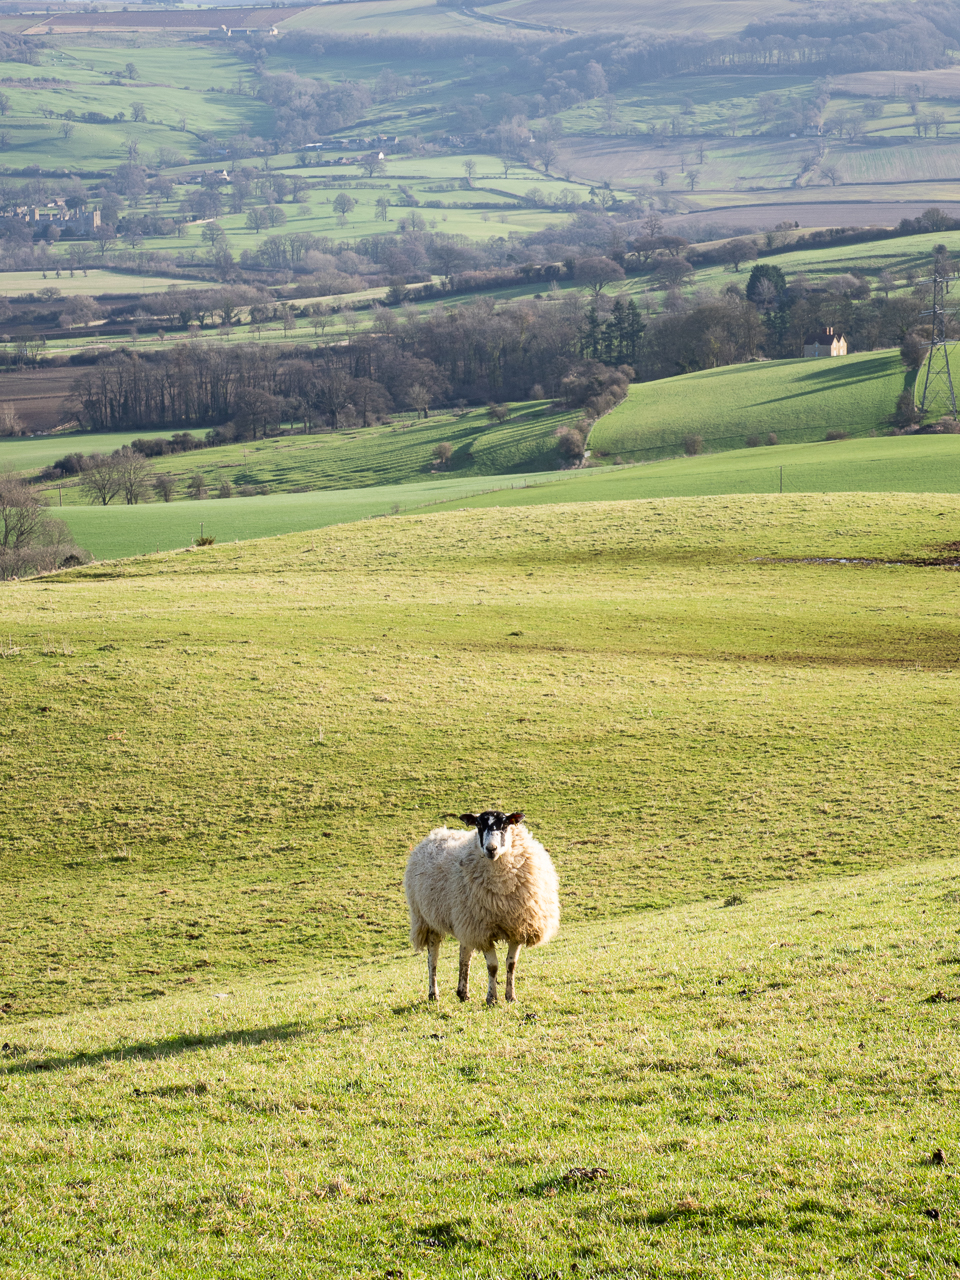 Sheep graze at Postlip Warren, a hill near Cleeve HIll in the Cotswolds, Gloucestershire, England.